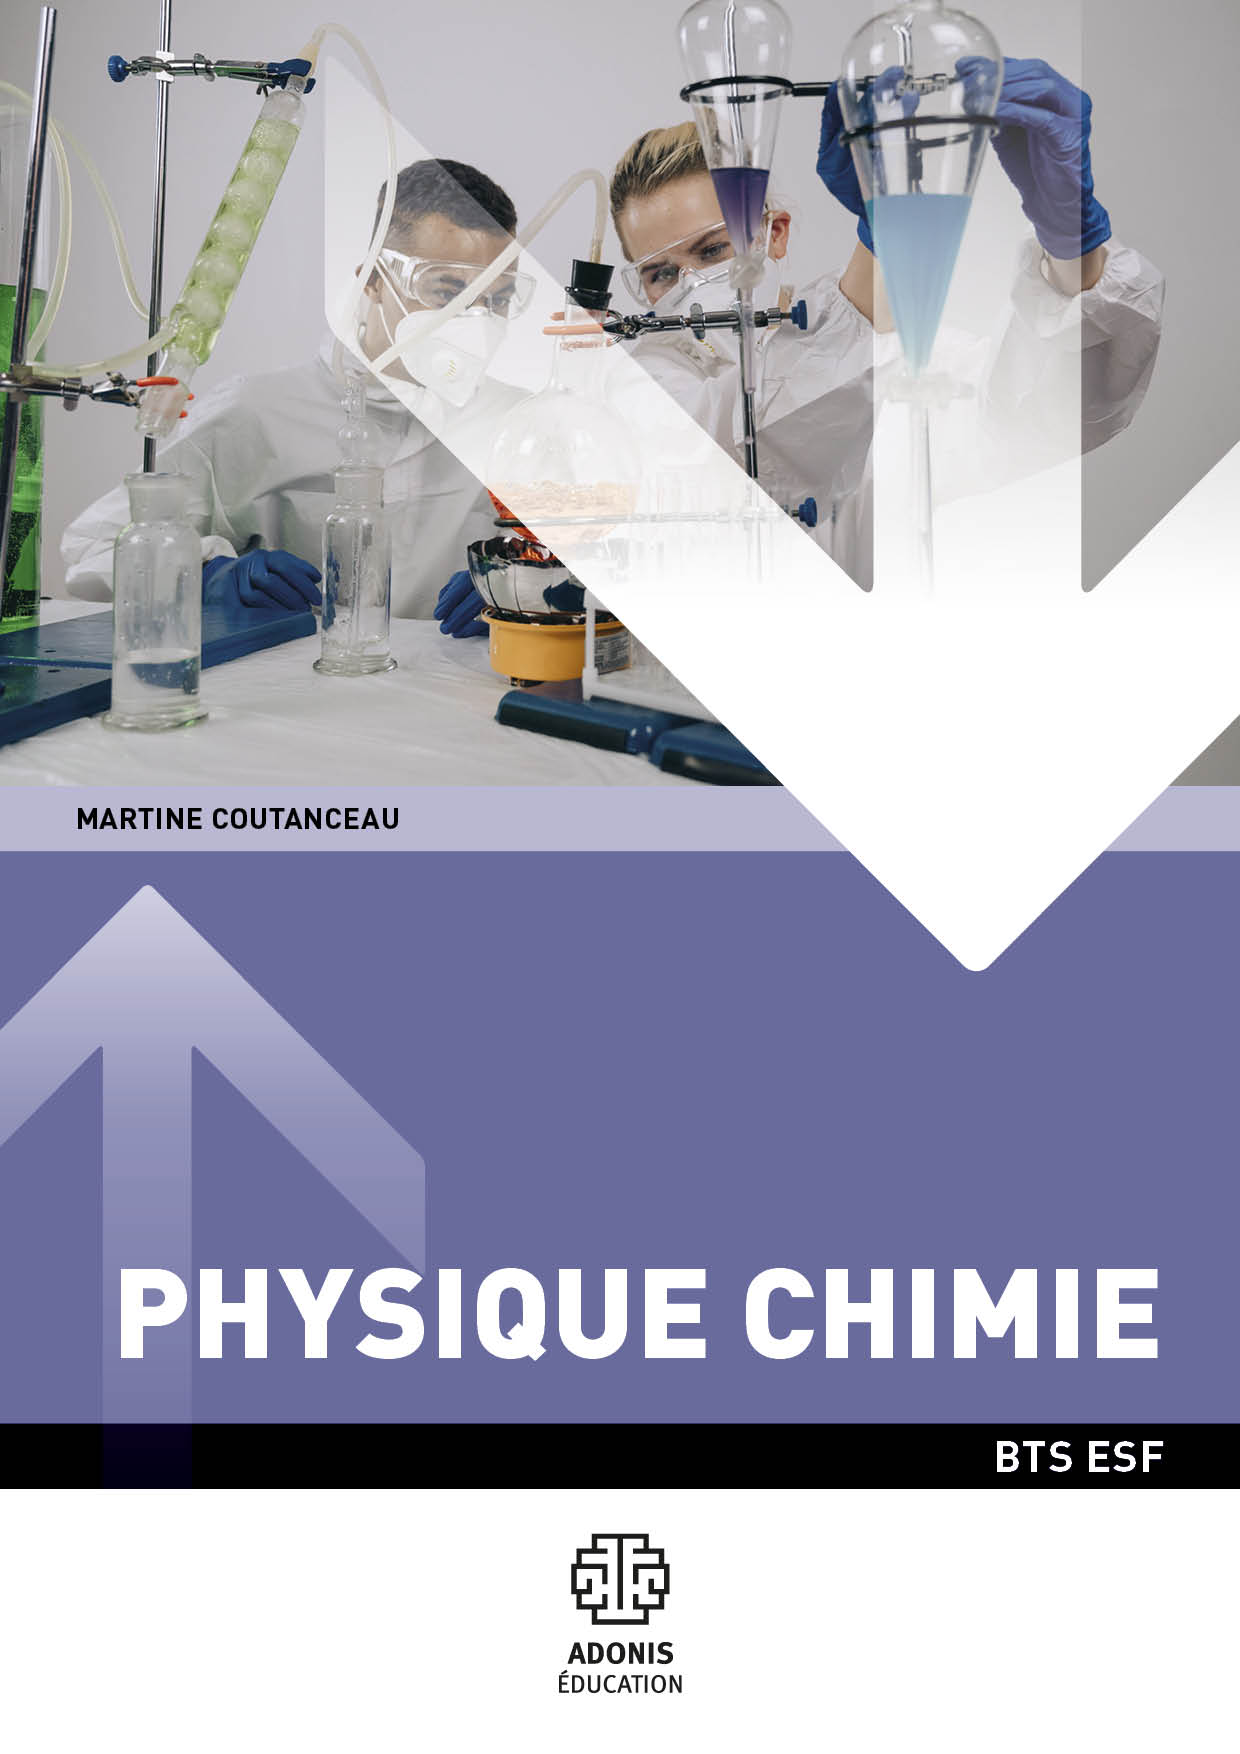 BTS ESF - Physique Chimie